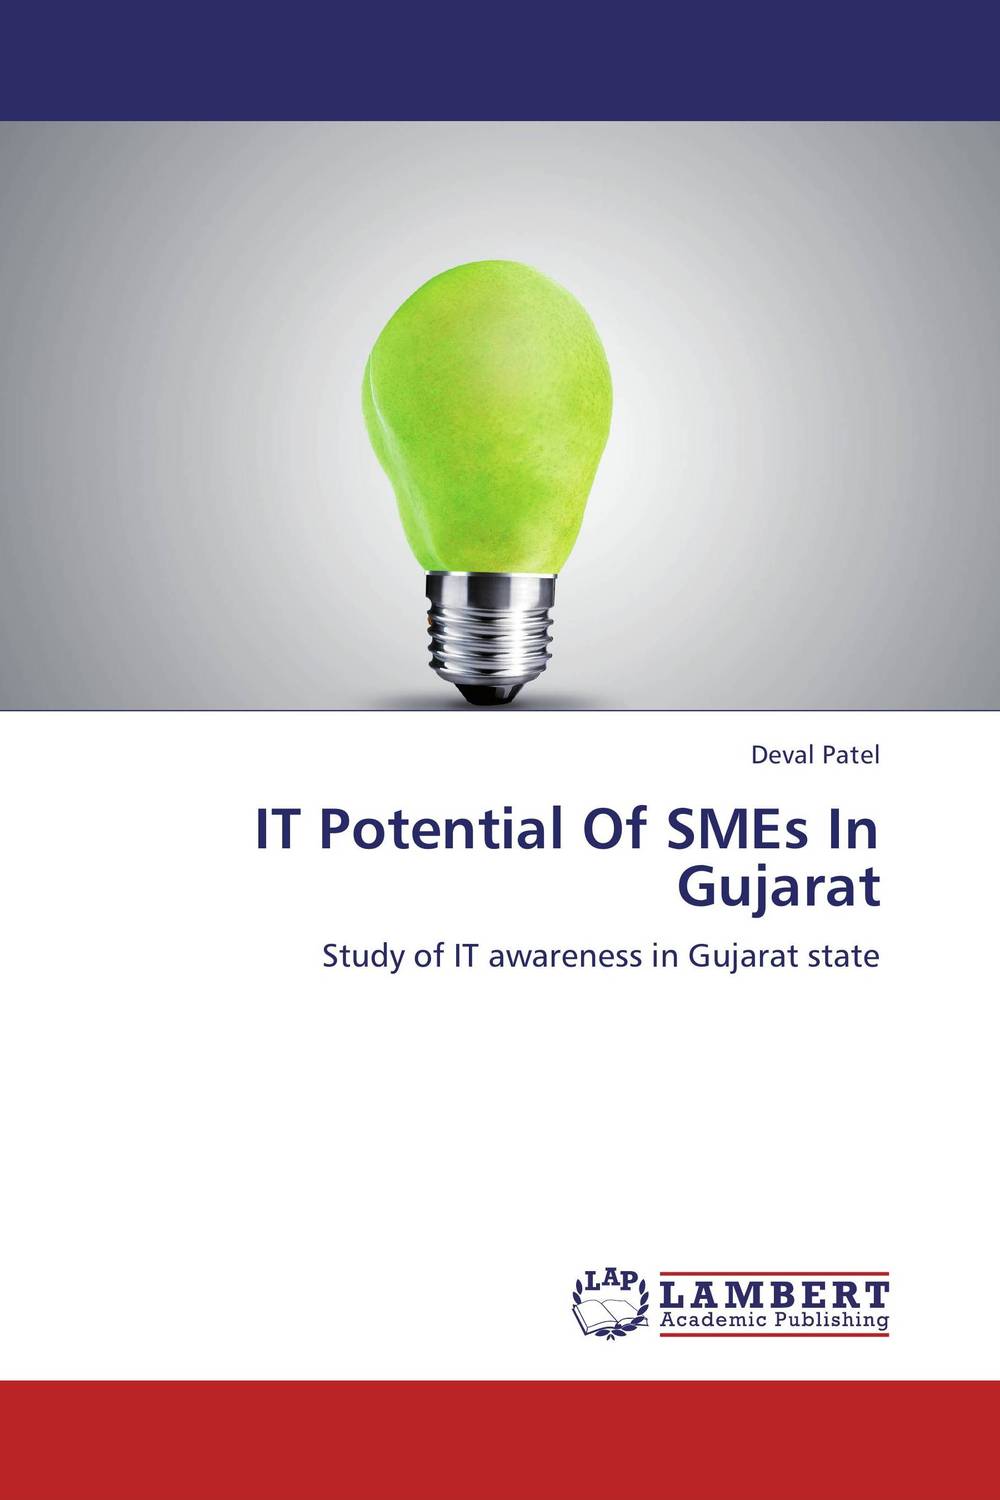 IT Potential Of SMEs In Gujarat